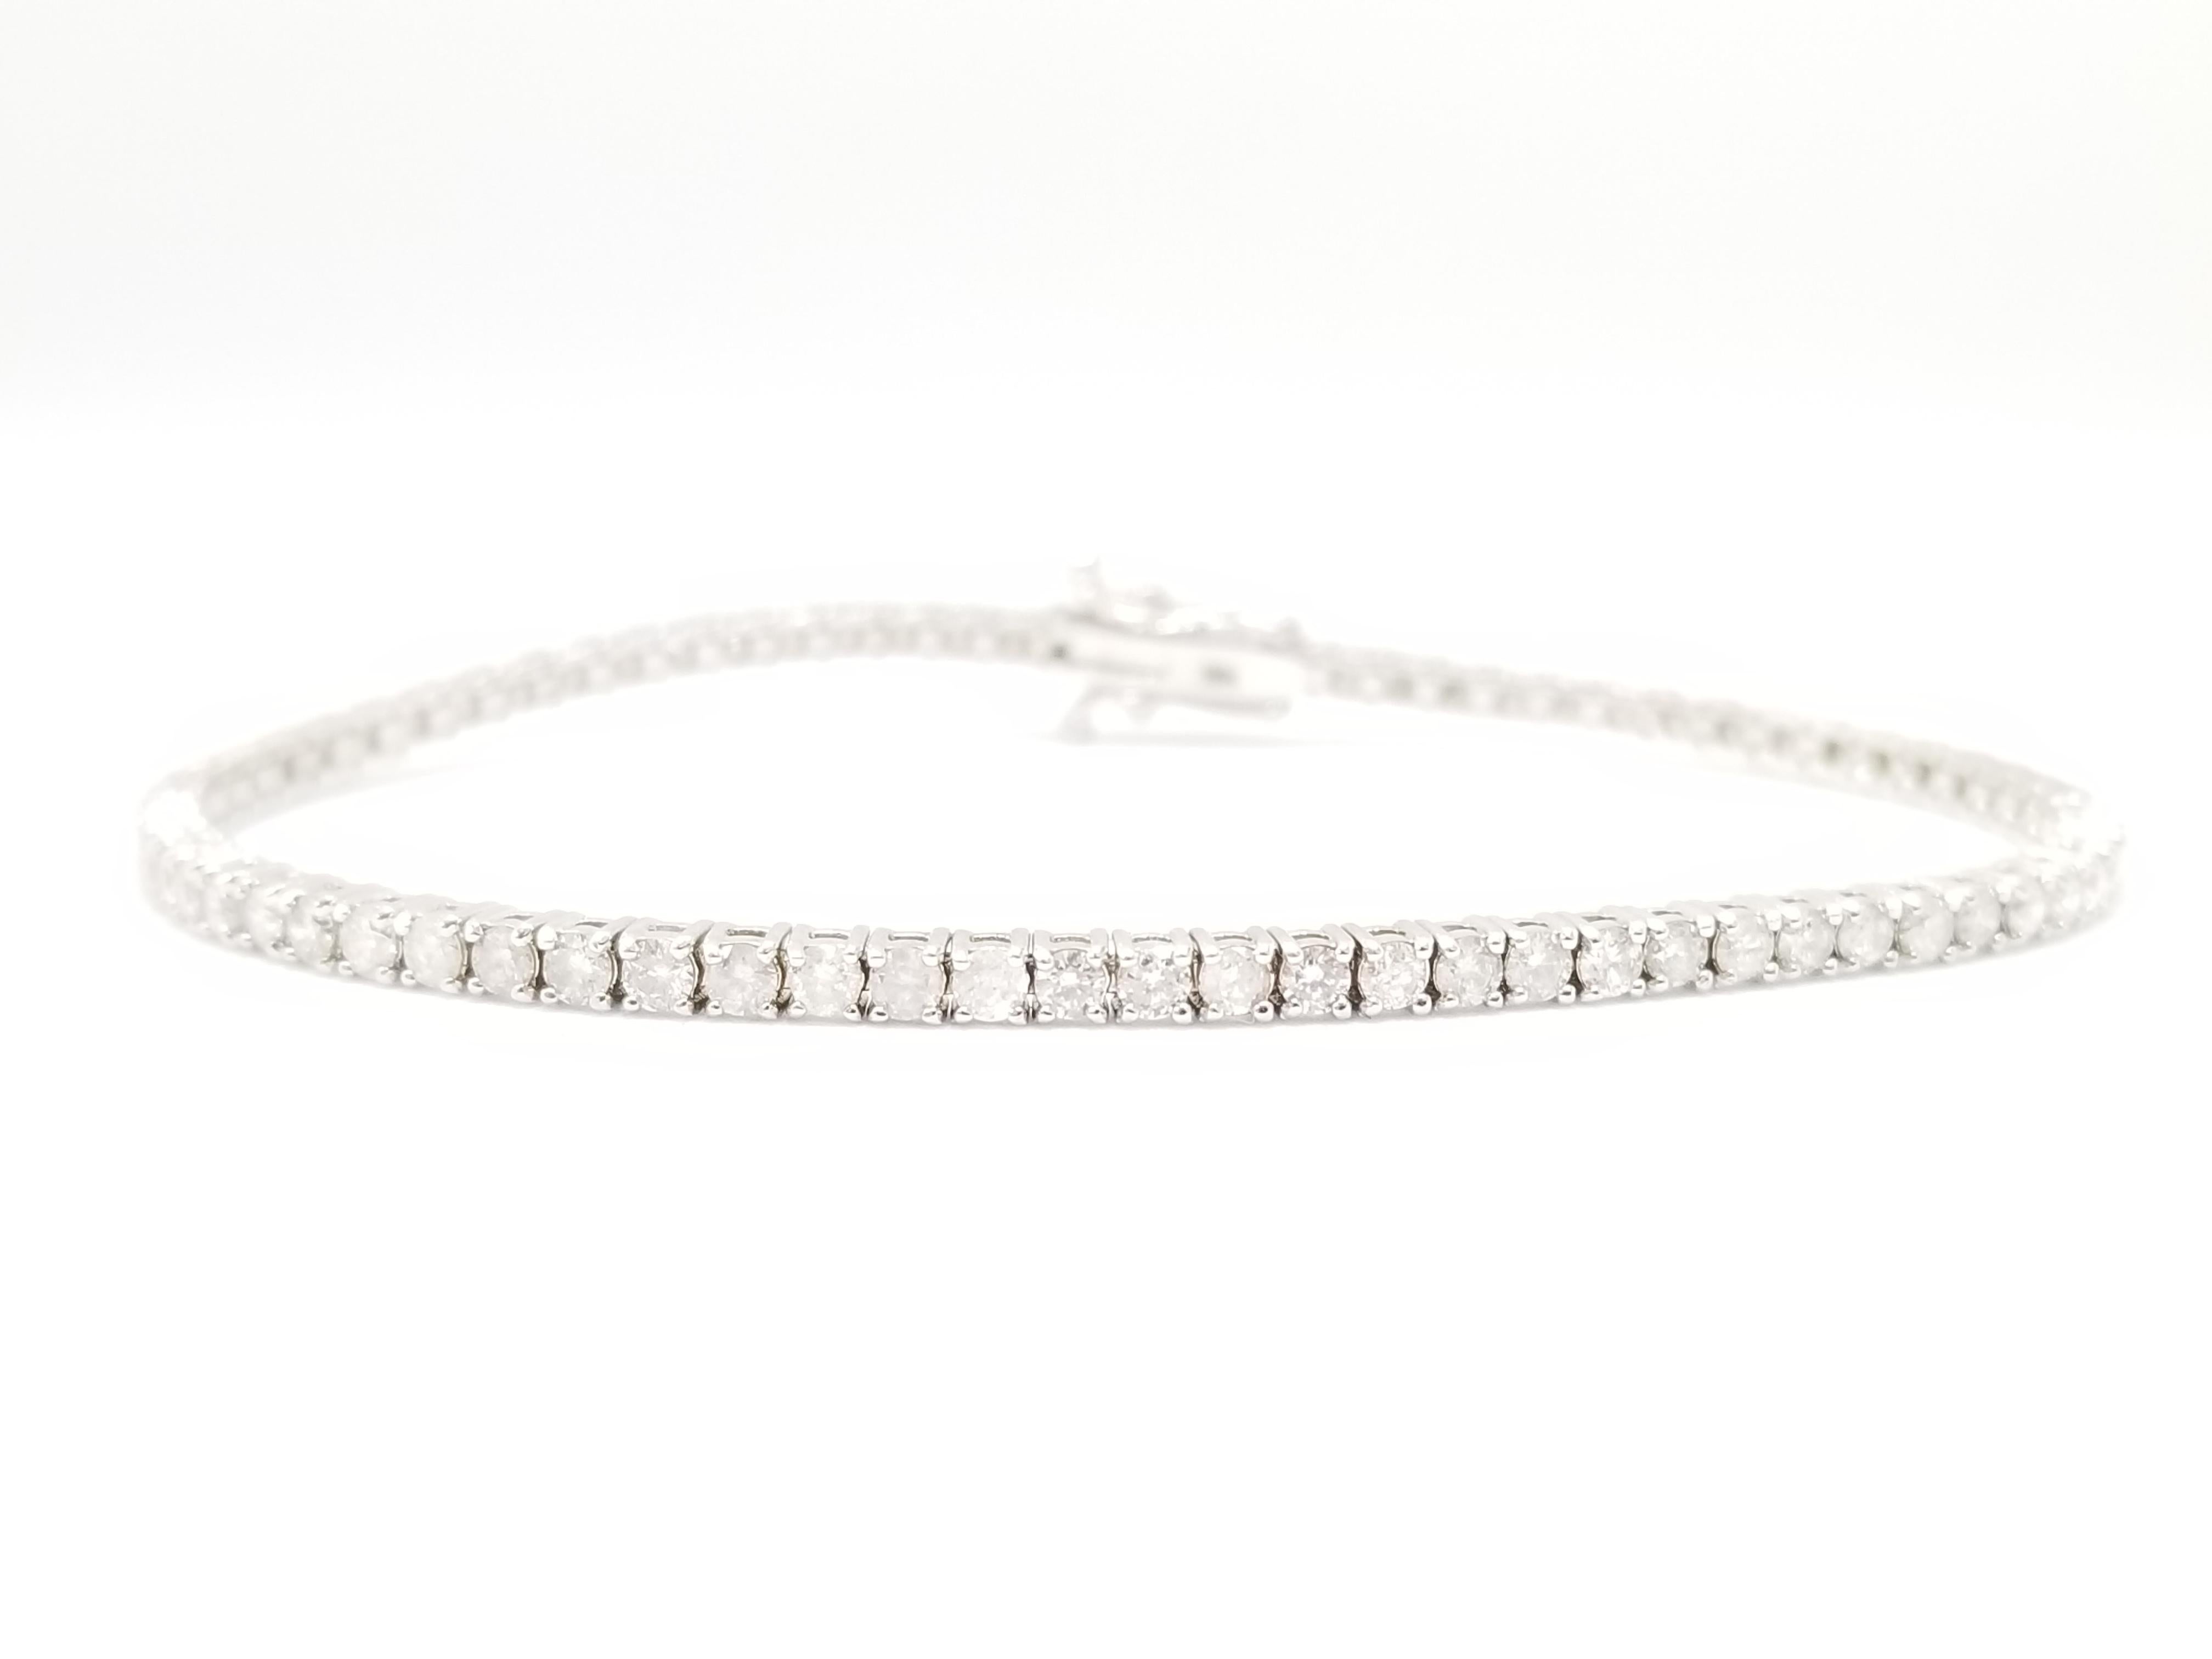 Exquisite style for everyday wear, Beautiful round-brilliant cut diamonds, set on 14k white gold. each stone is set in a classic four-prong style for maximum light brilliance. 7 inch length. Color F, Clarity SI-I1. 2.3 mm wide. Luxury for every